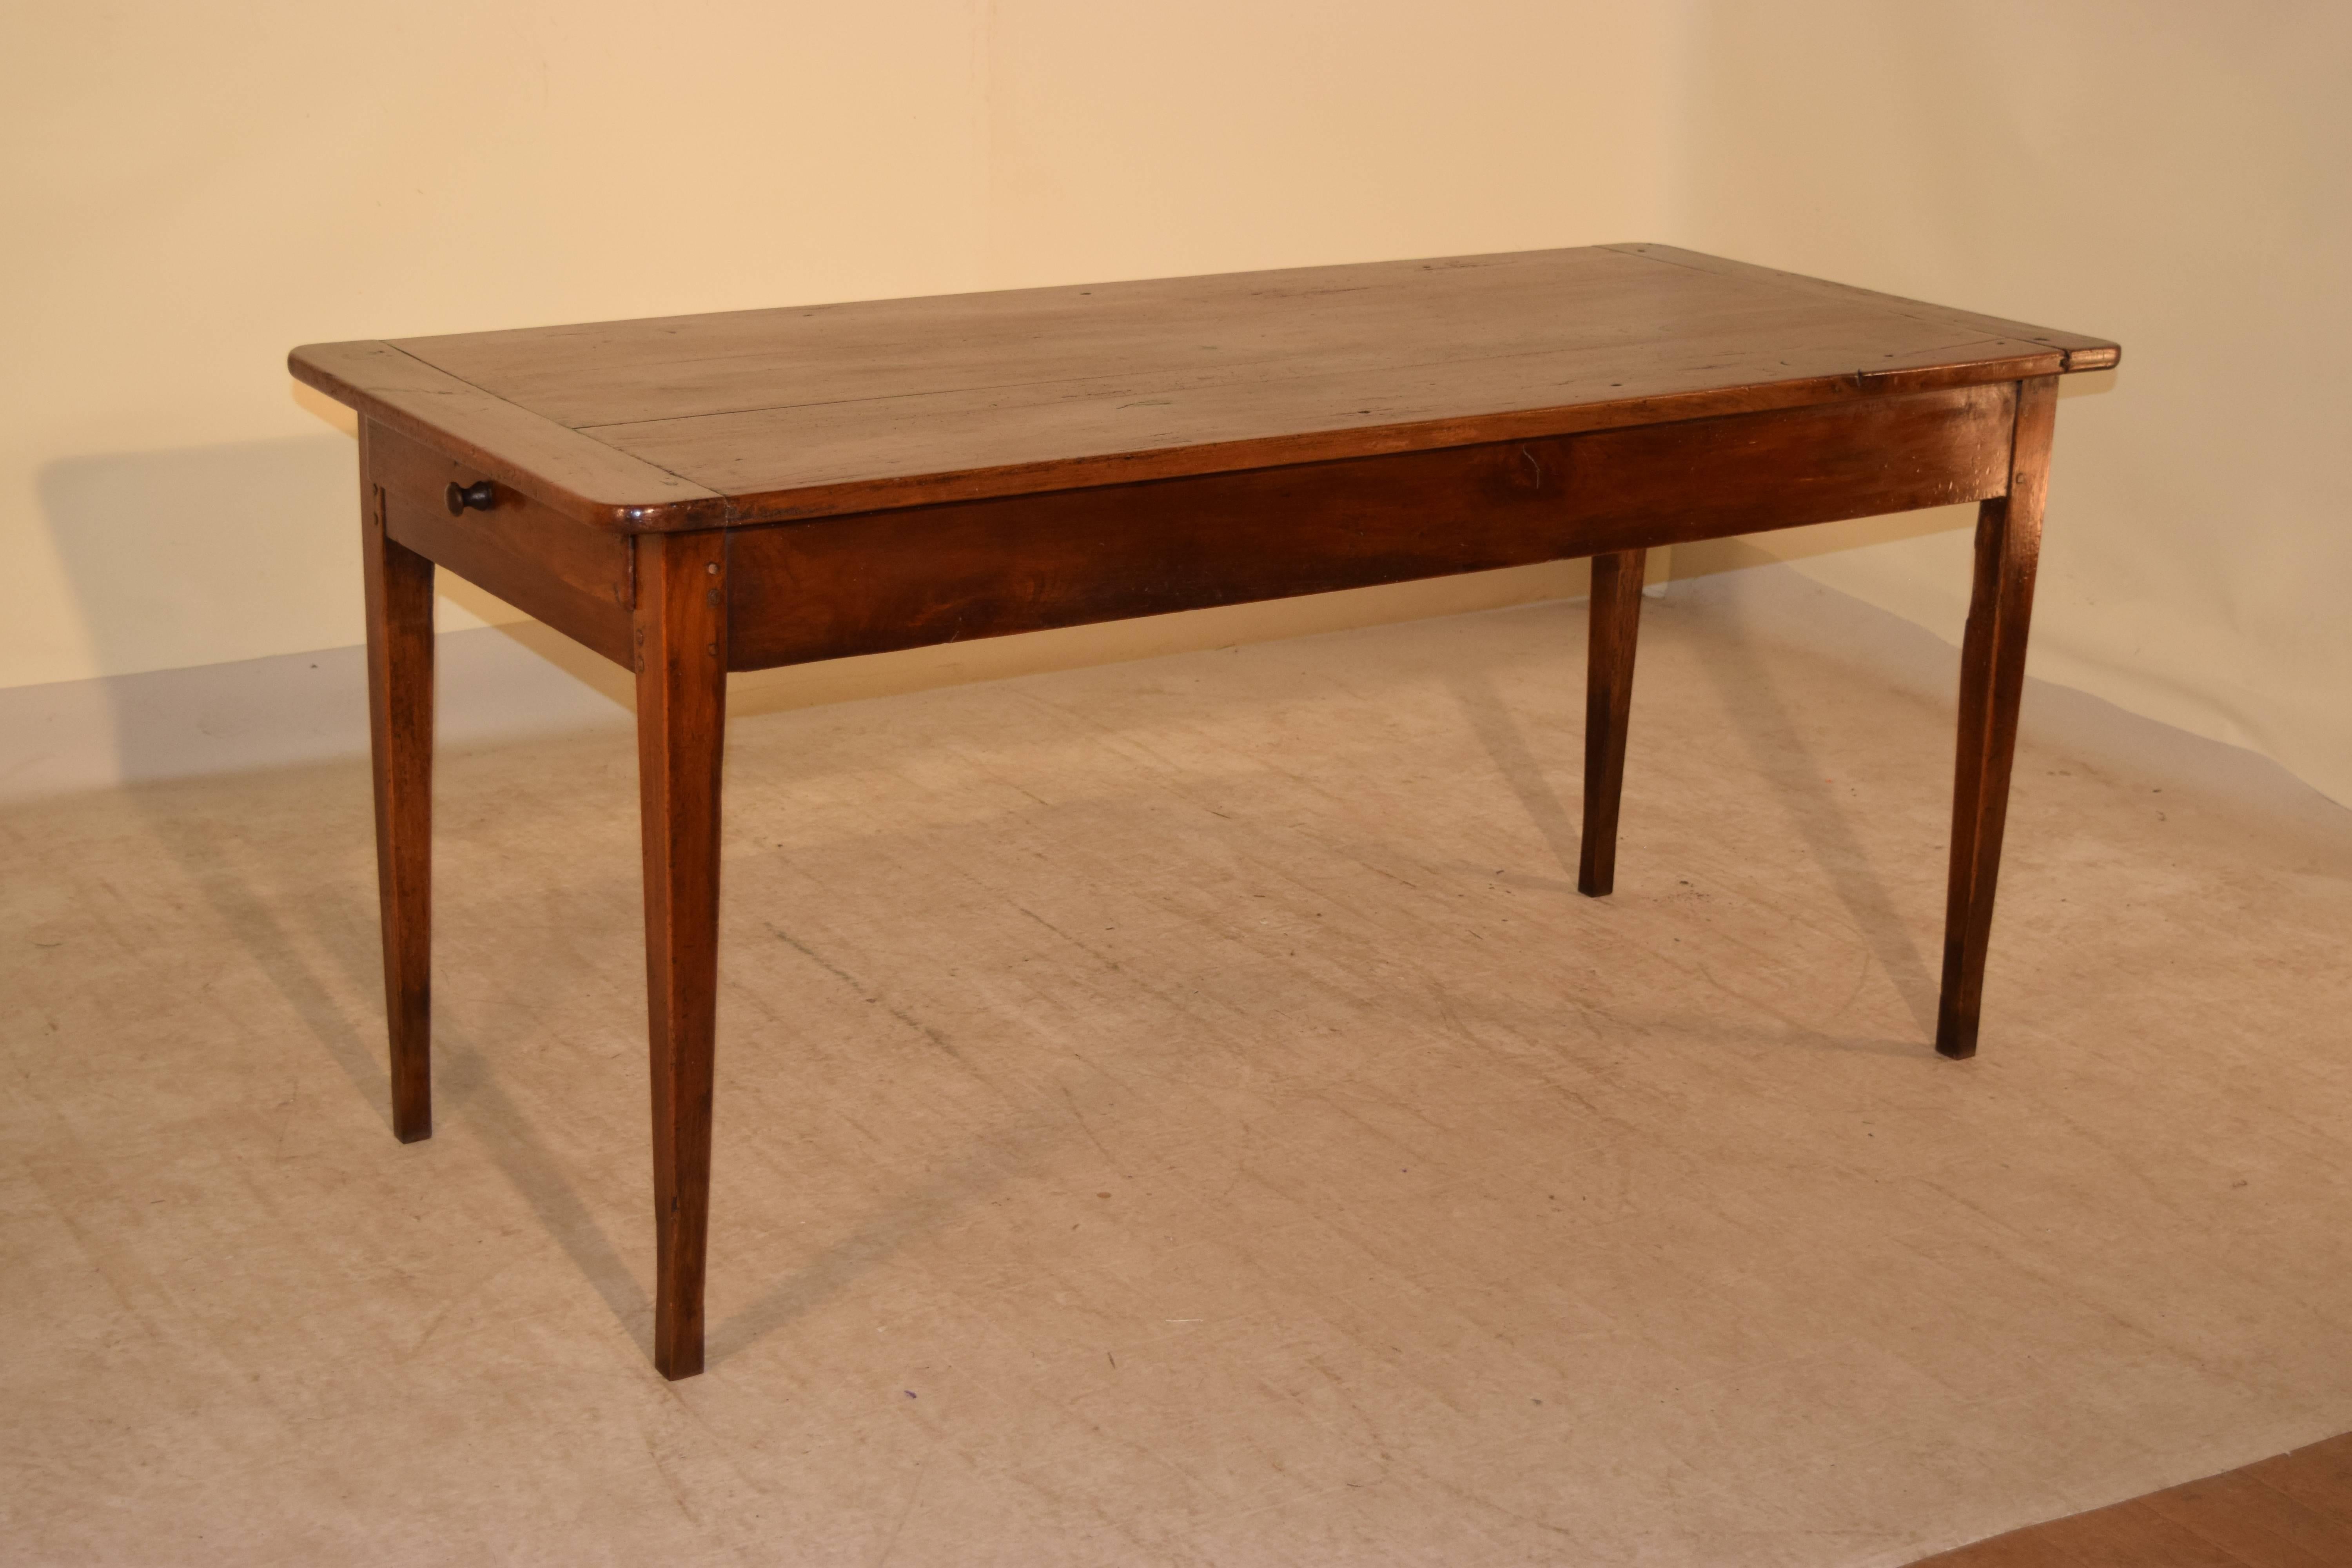 19th century French farm table made from cherry. The top is made of three planks with bread board ends, following down to a simple apron with a single drawer on one end and a bread board on the other which extends. The piece is raised on simple